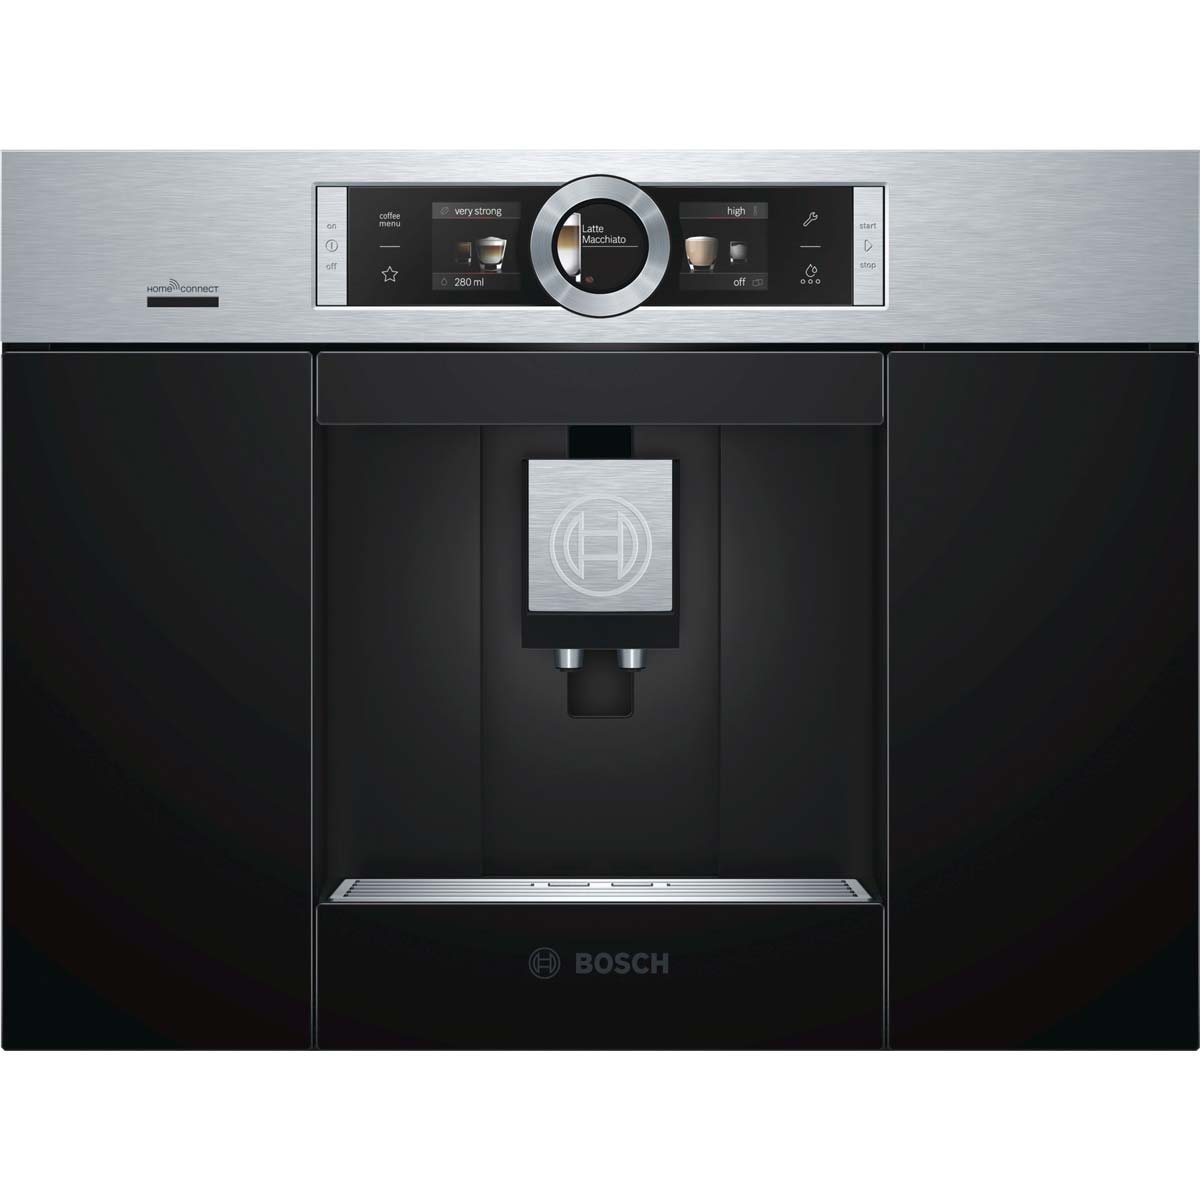 Bosch Built-in Coffee Machine - CMC Electric - Electrical Appliances in Cyprus